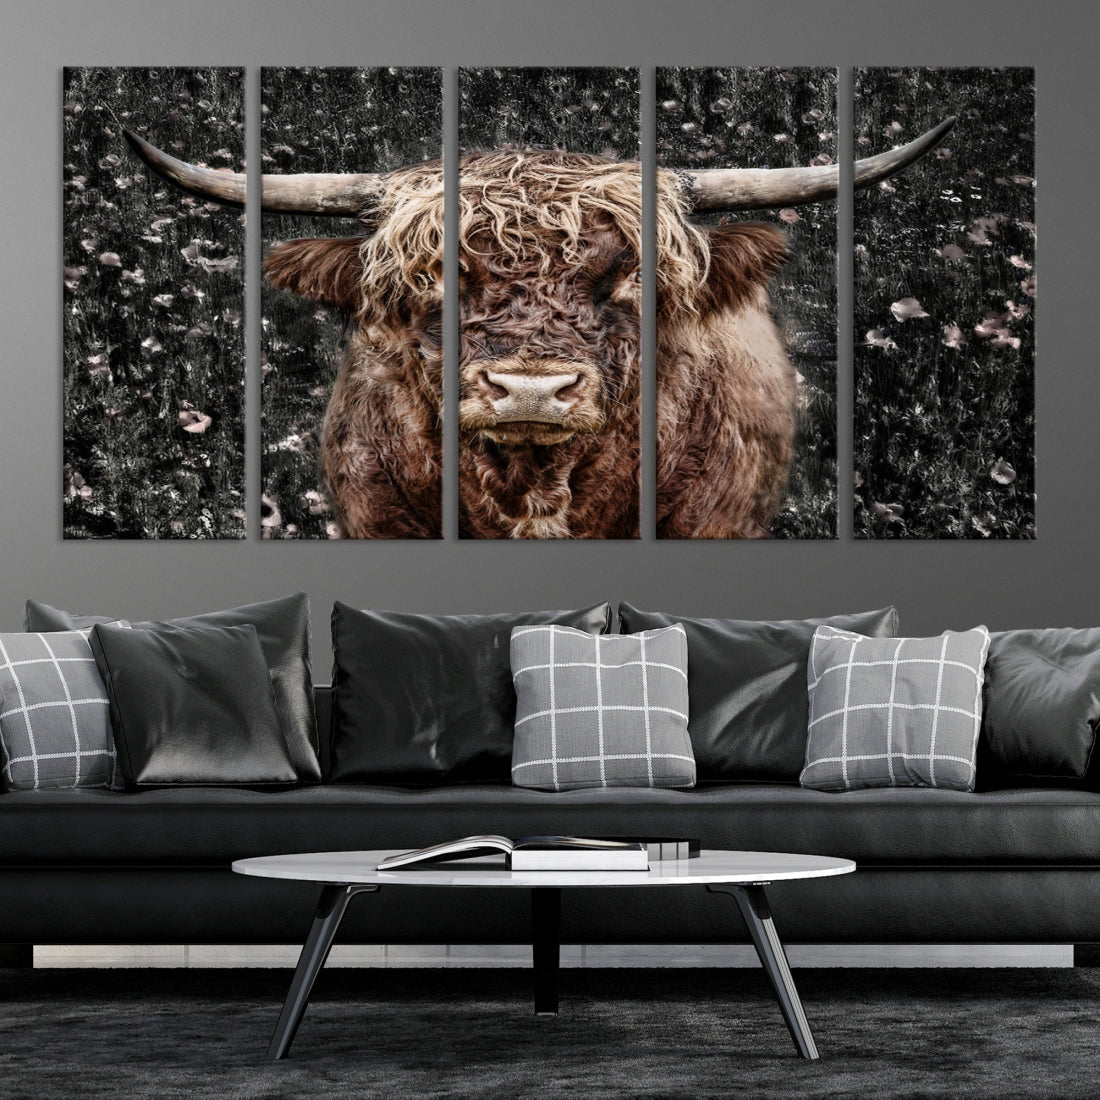 Highland Cow Photography Canvas Wall Art Print Animal Wall Art Painting Large Cow Canvas Print Home Office Ranch Farm